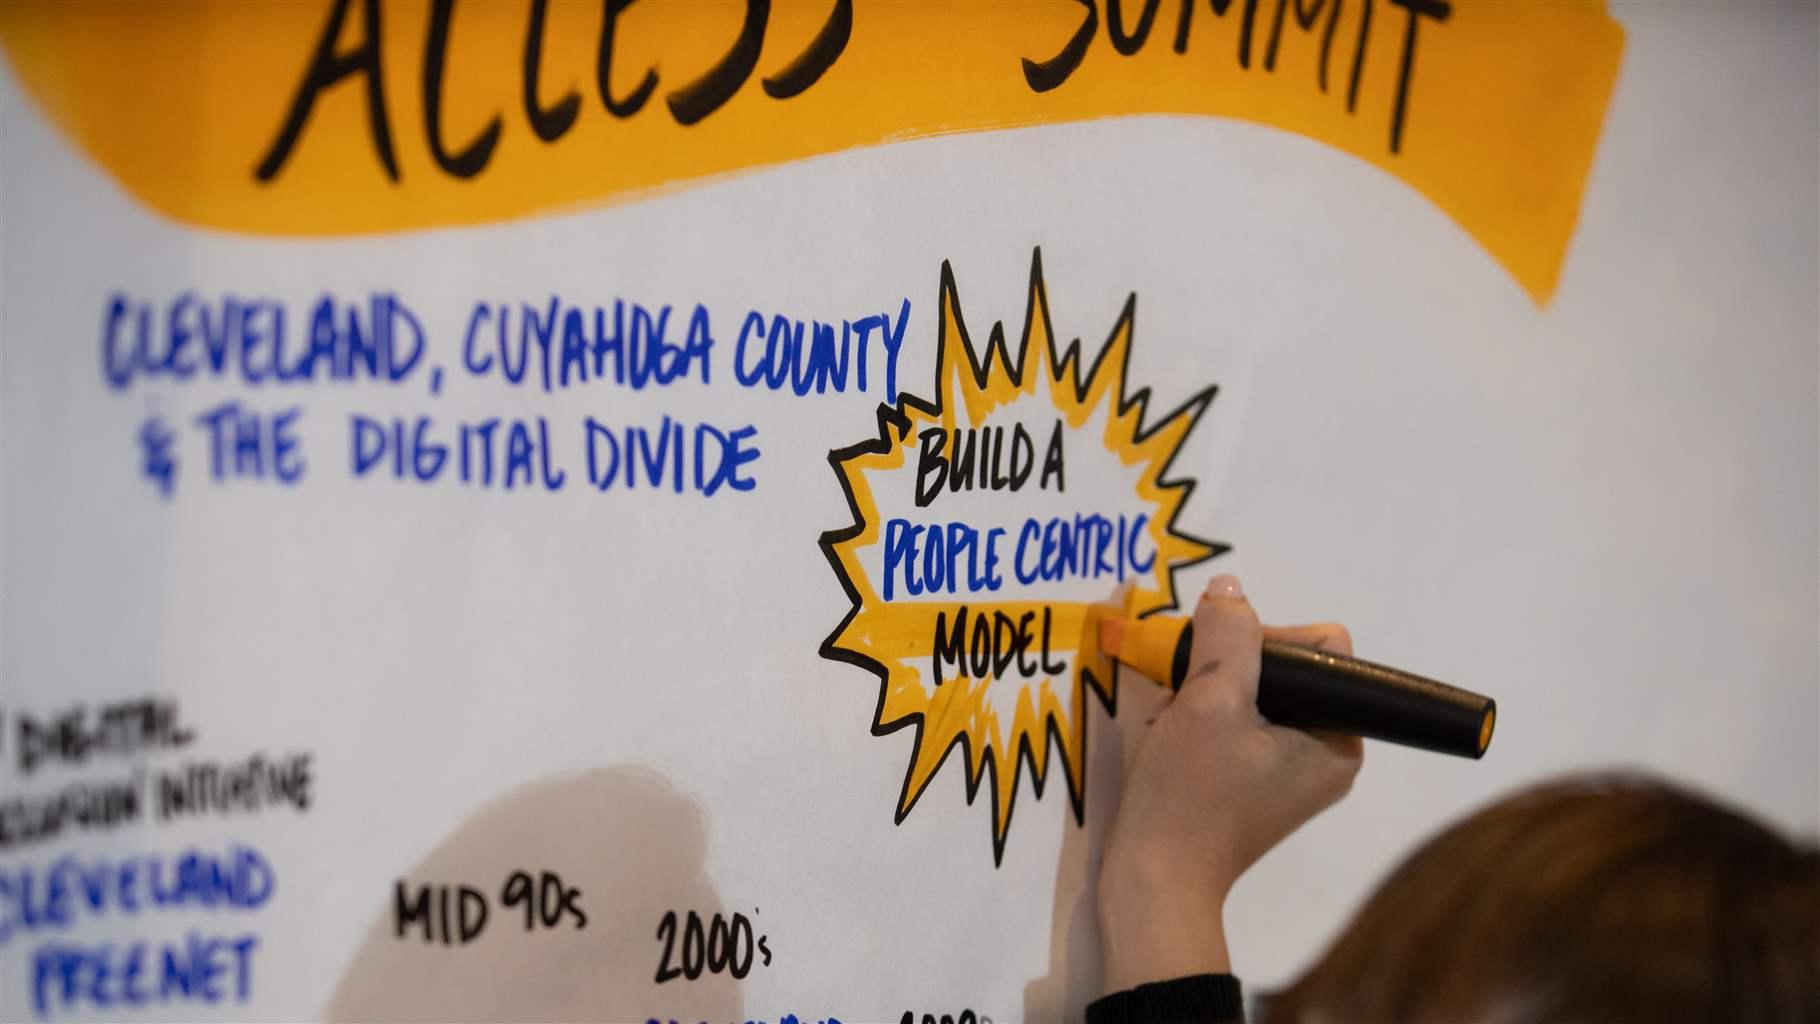 Visual note taker at Pew's Broadband Access Summit in Cleveland, Ohio.